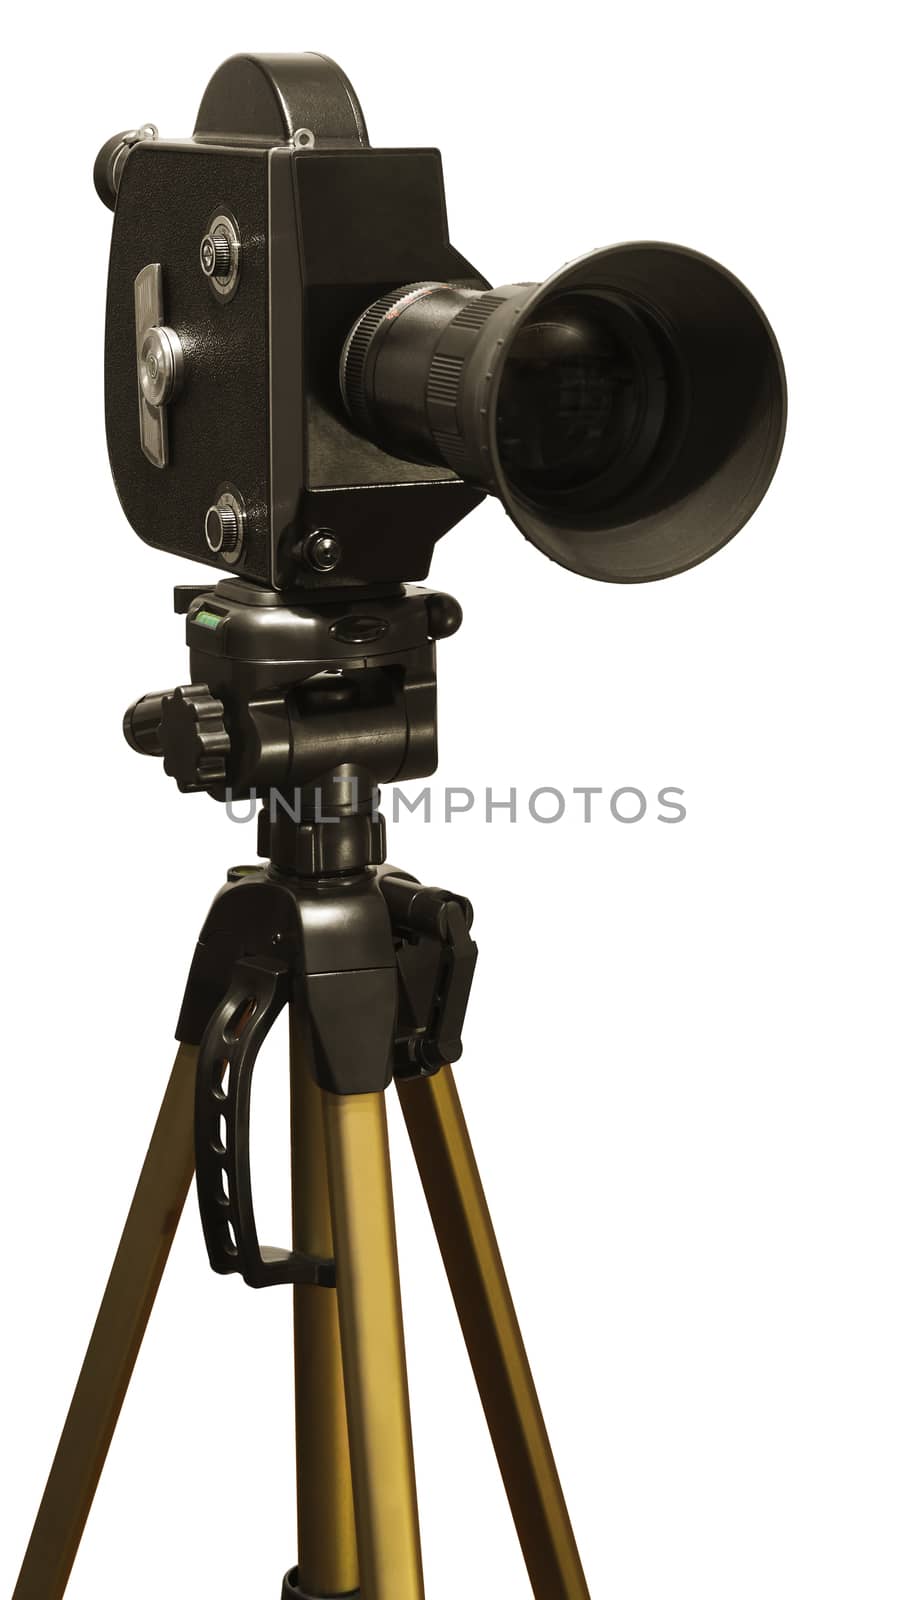 Old fashioned movie camera on a tripod close-up isolated on a white background.